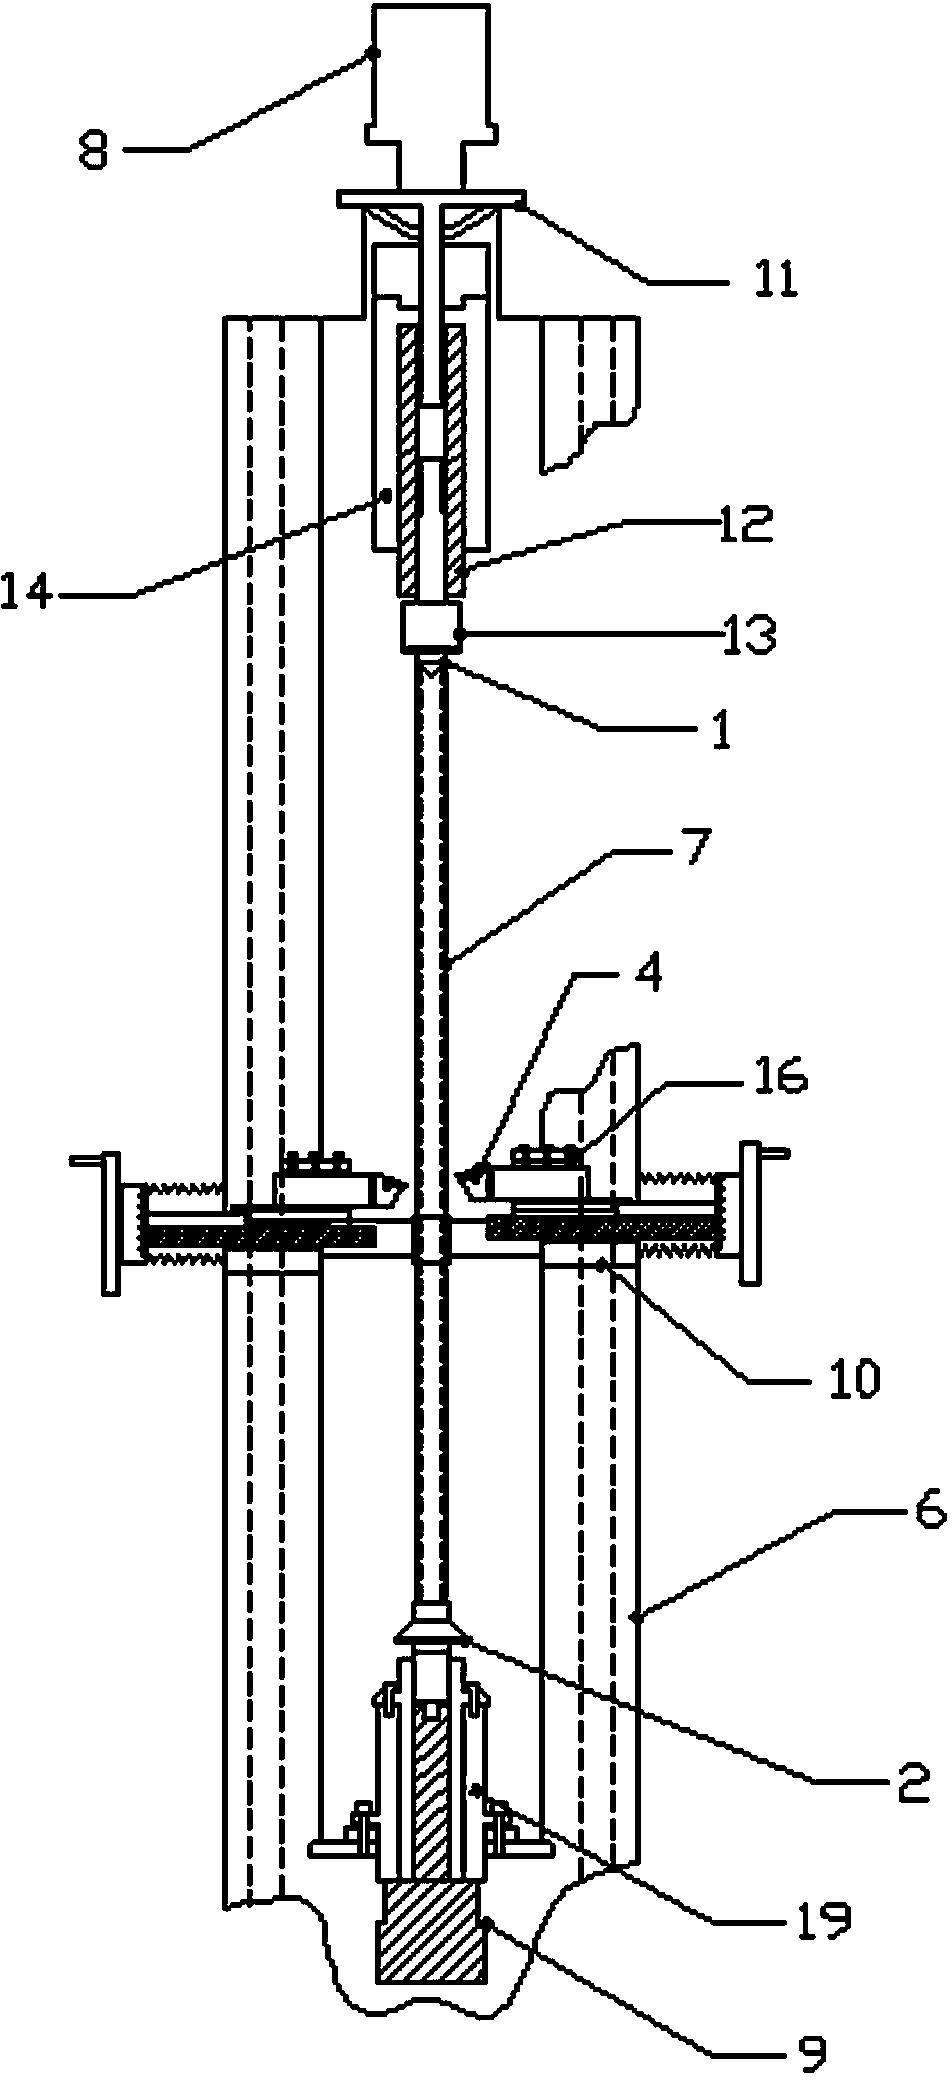 Bar material blank processing device